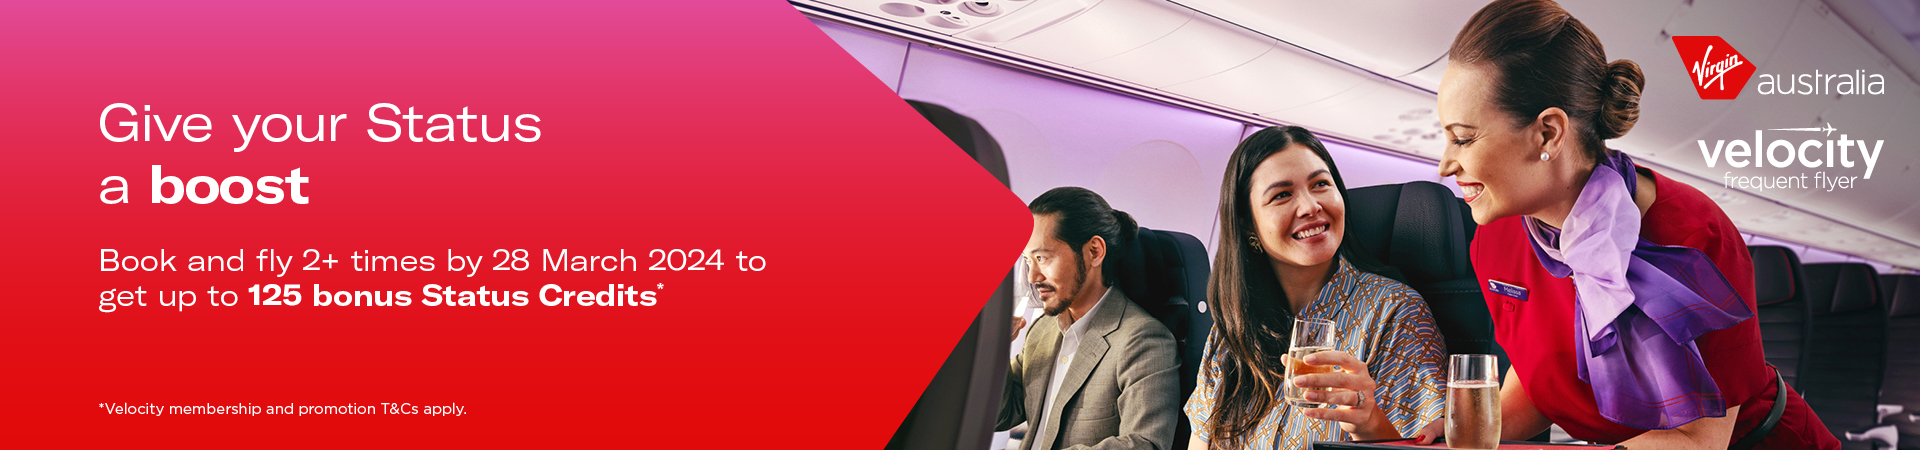 Strengthen your Velocity frequent flyer status with Virgin Australia.  Earn up to 125 bonus status credits when you make two or more bookings and fly by March 28, 2024.  Terms and conditions apply. 